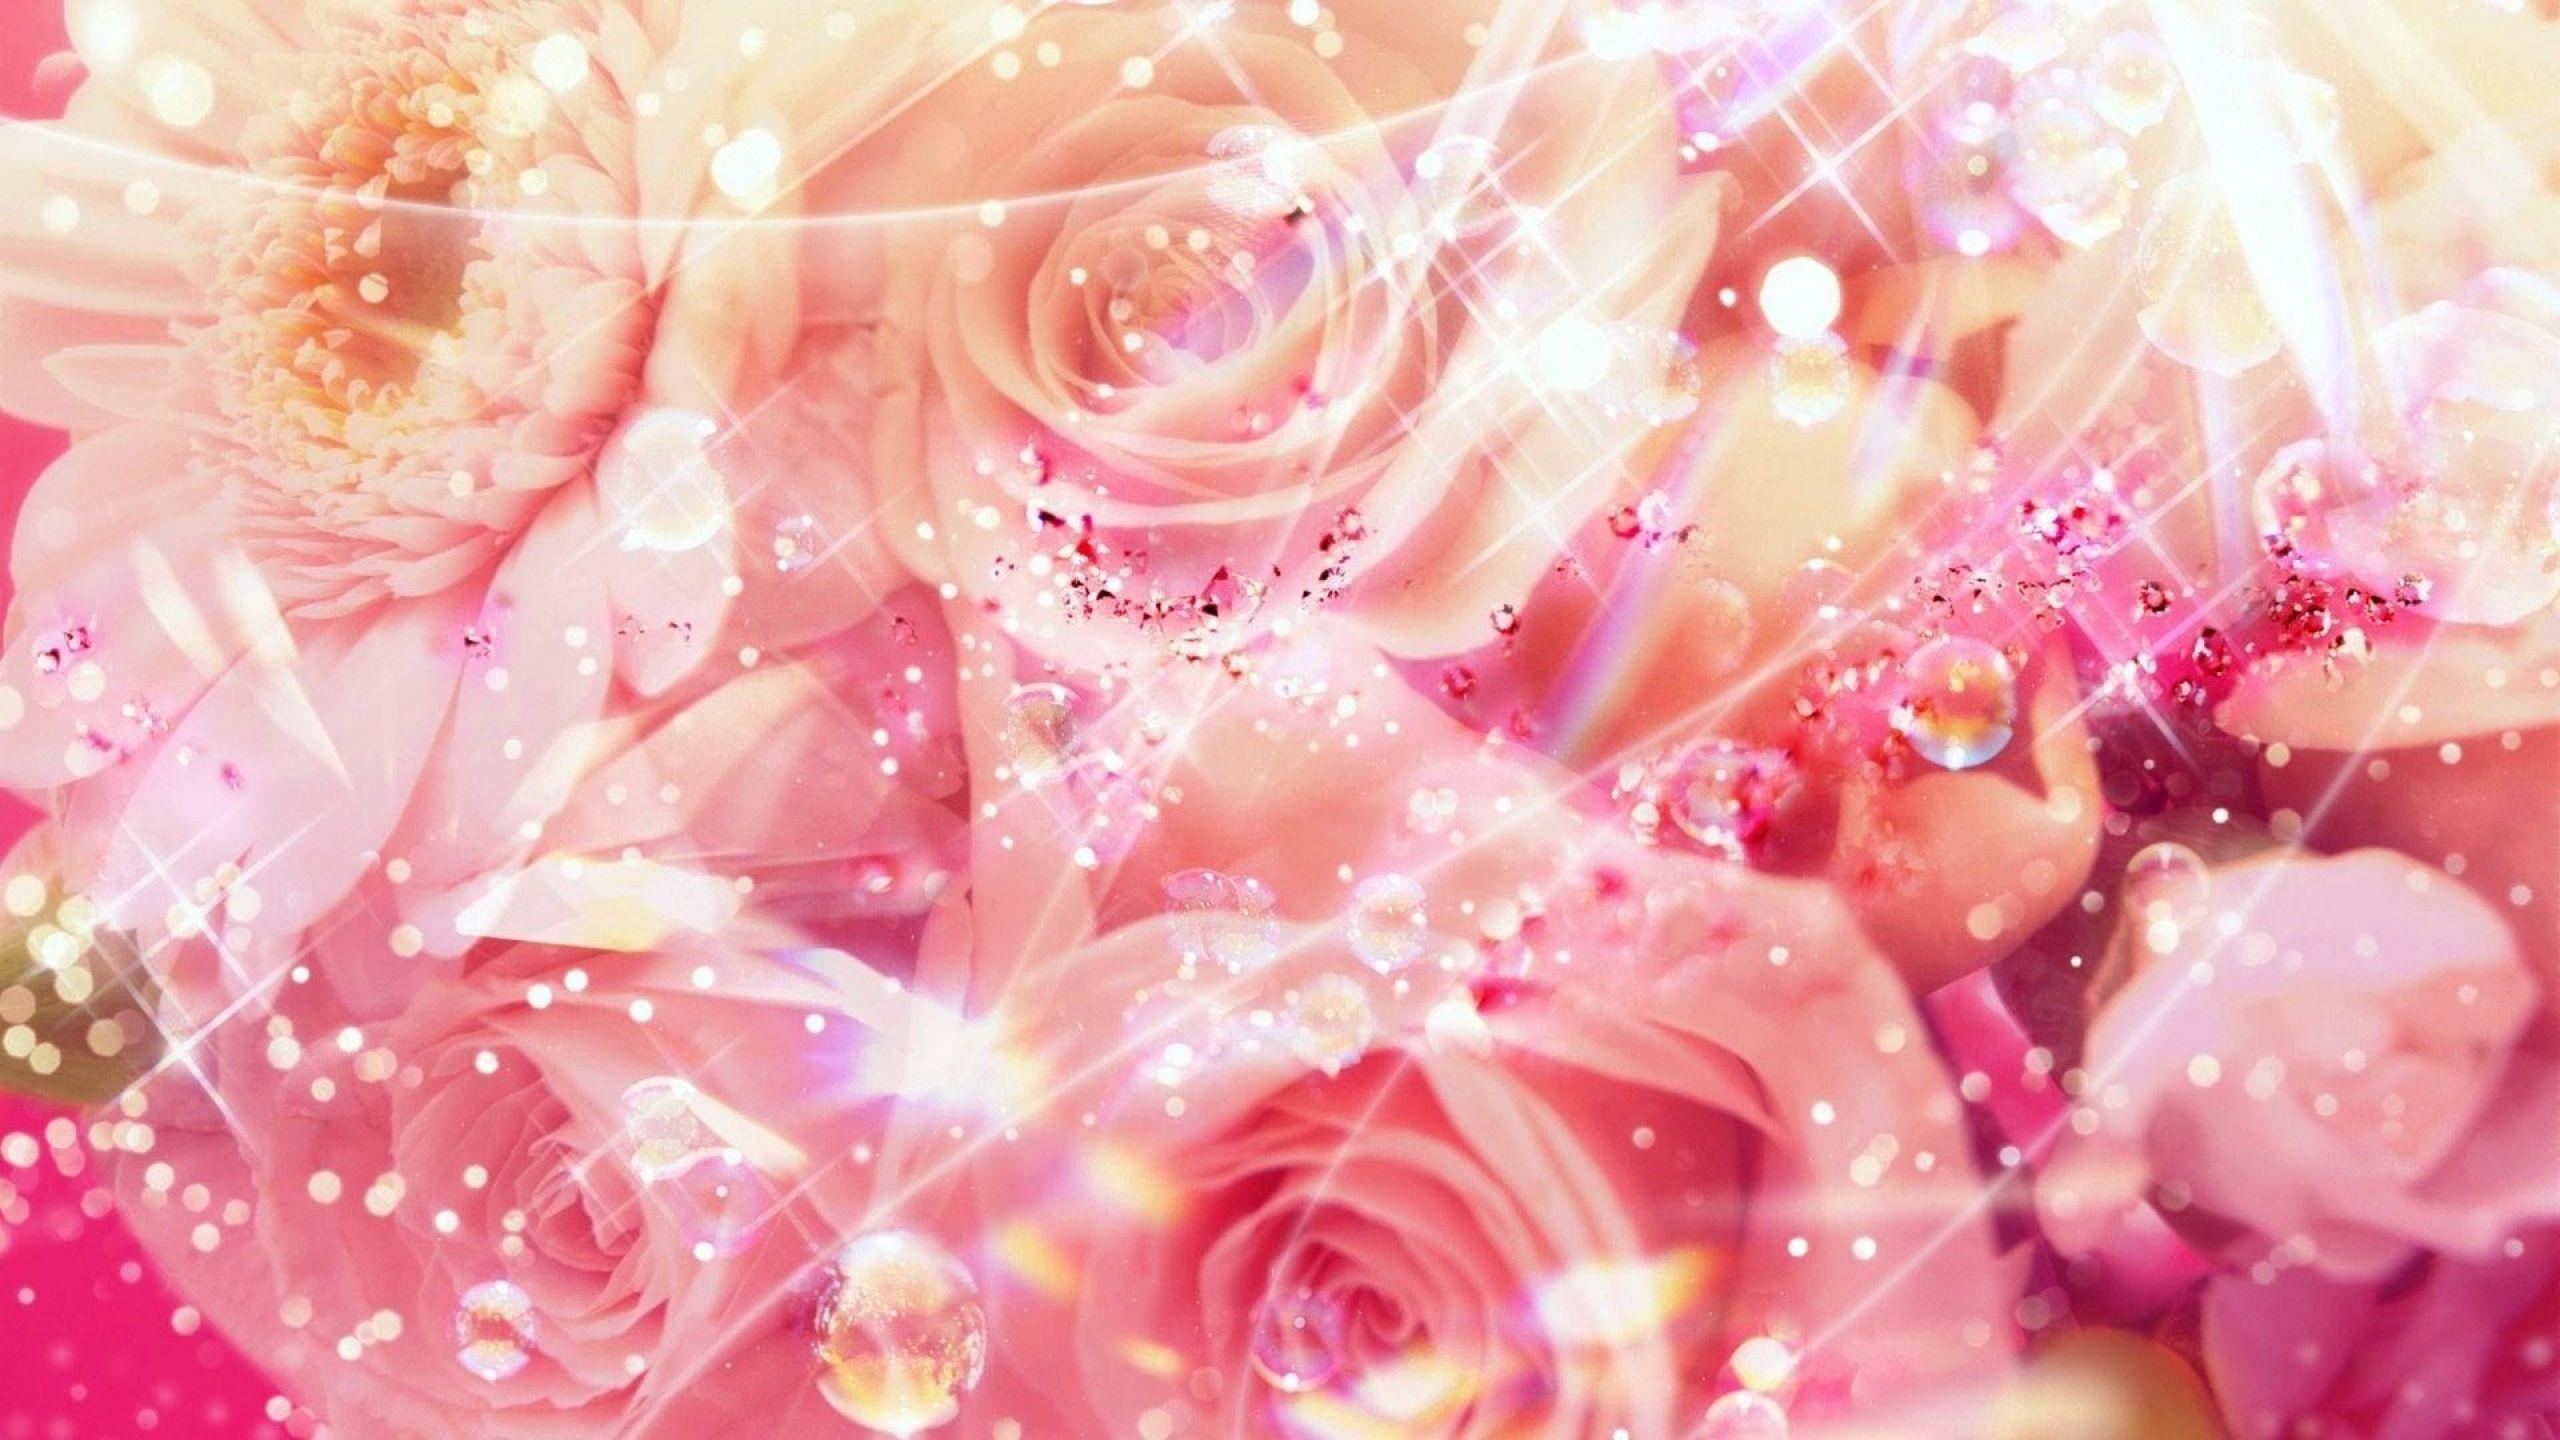 Download Wallpaper 2560x1440 roses, flowers, drops, patches, fairy